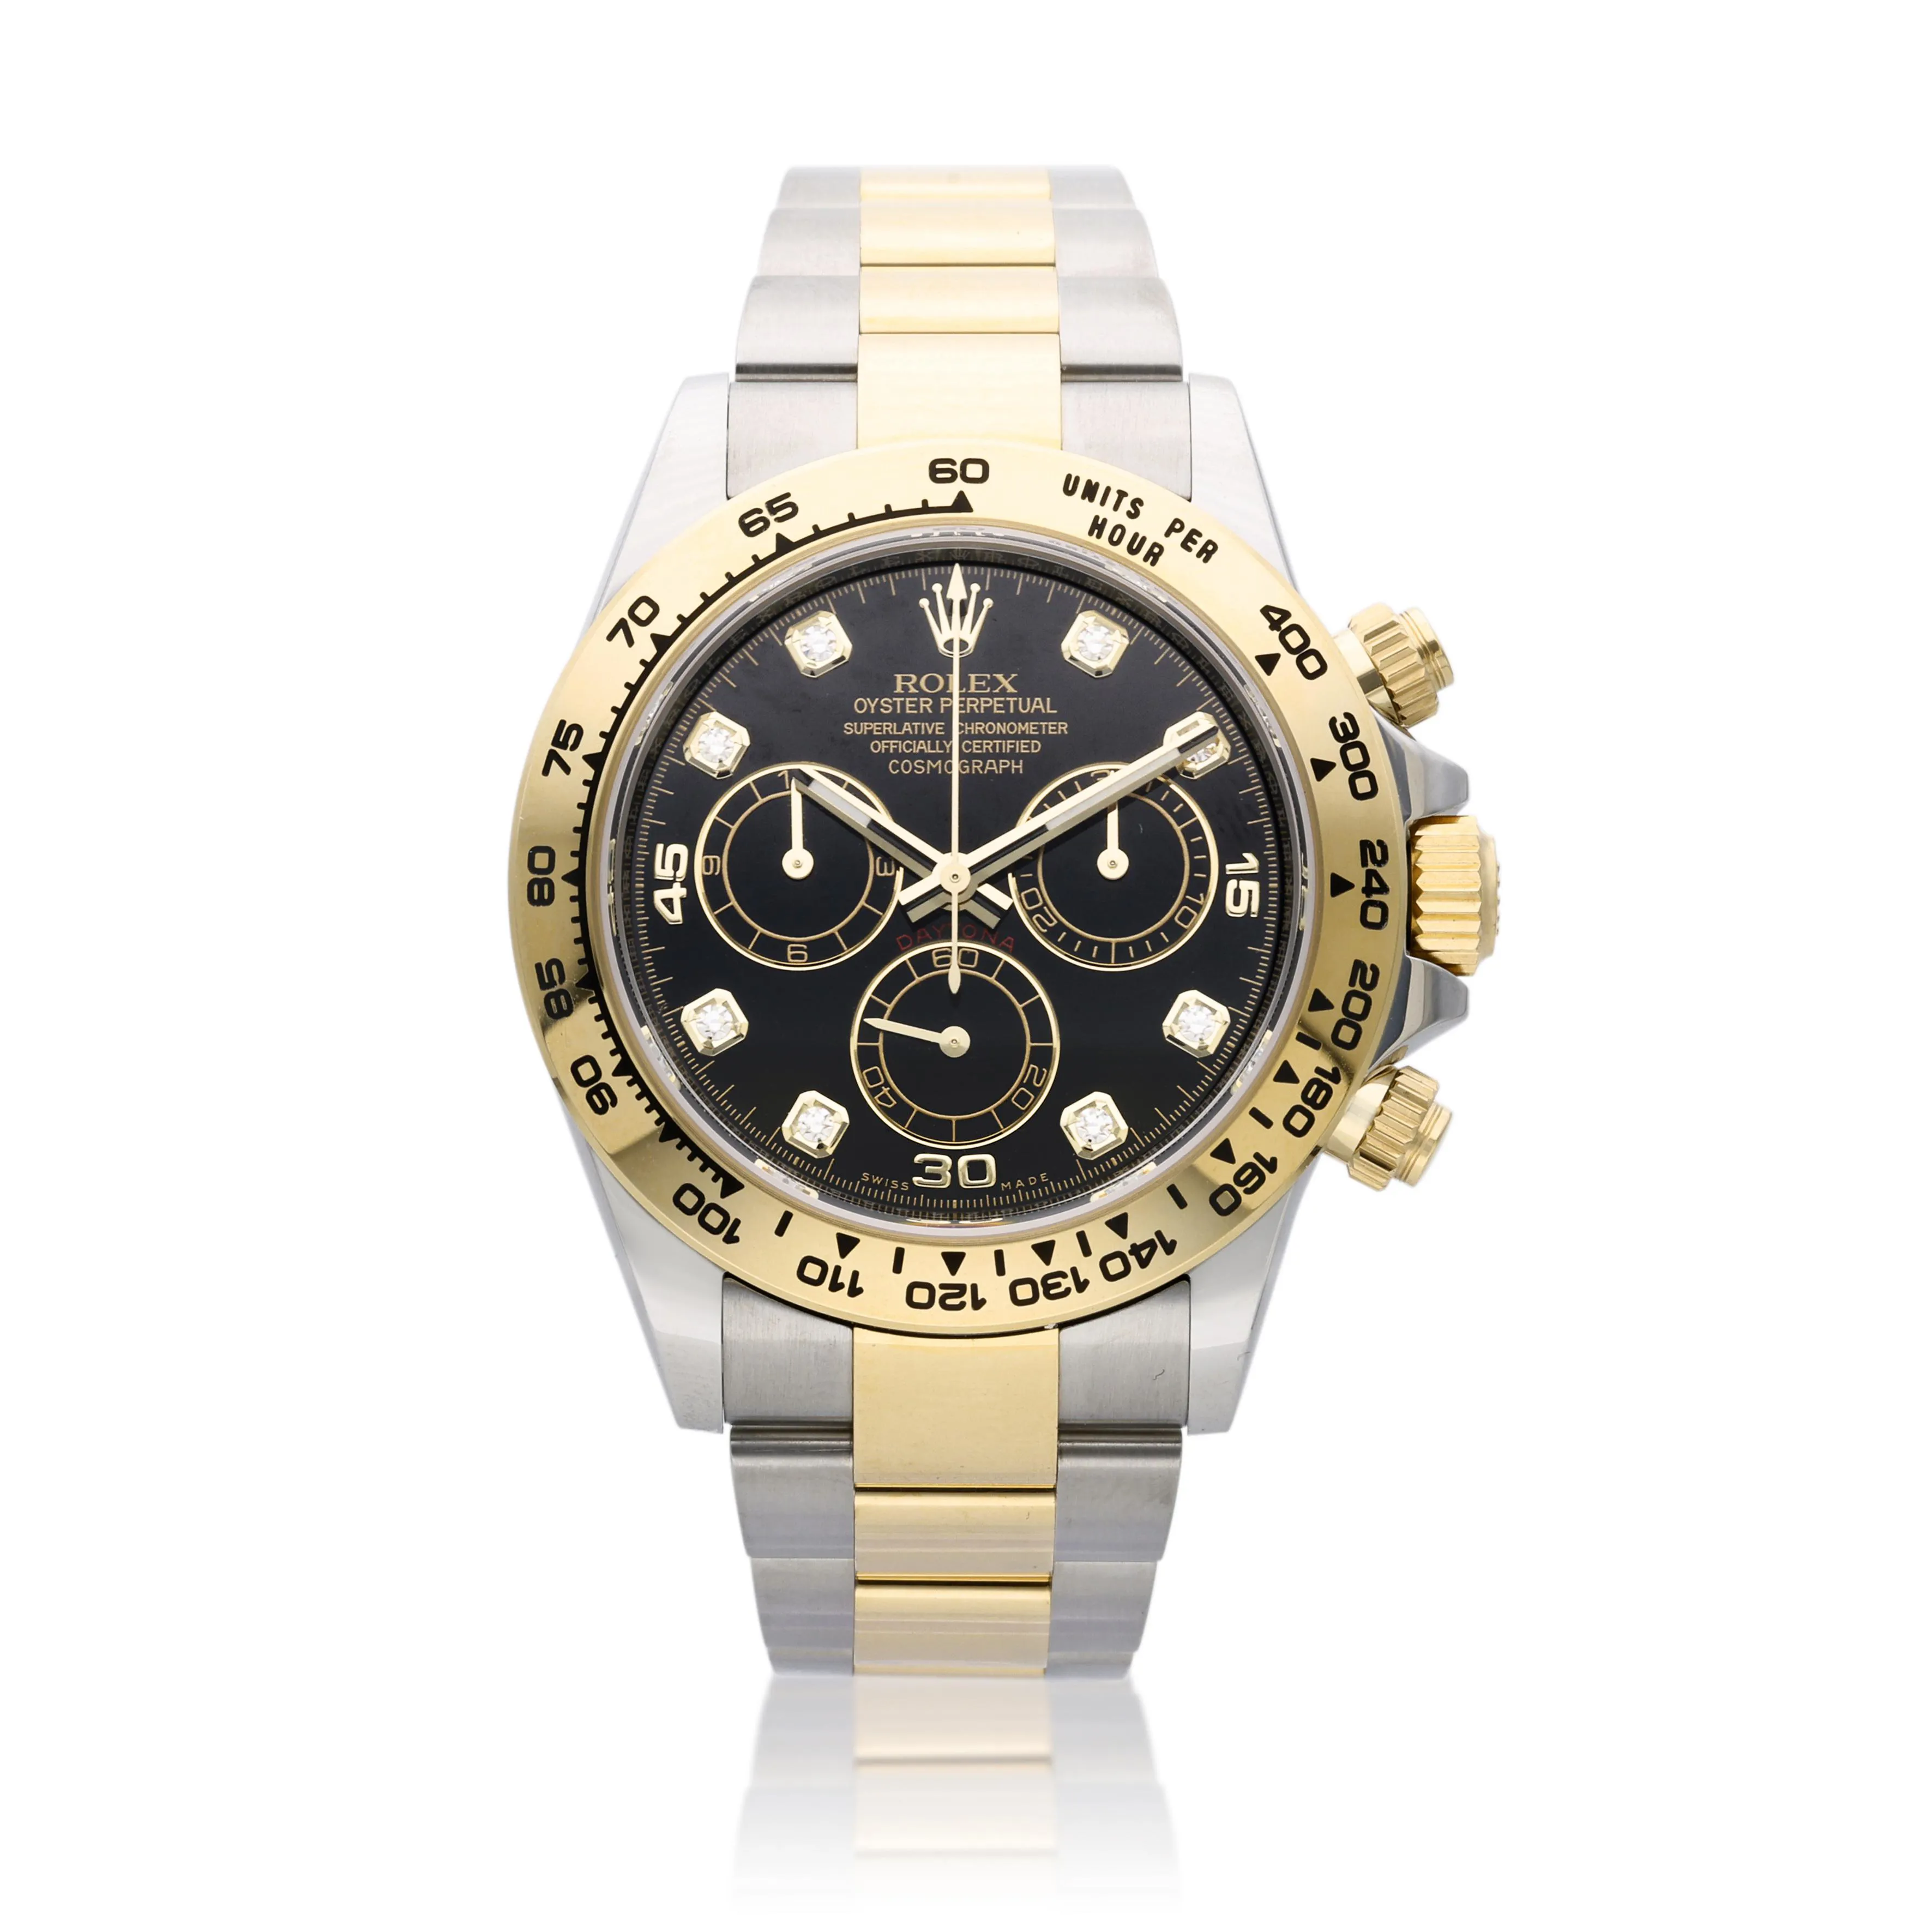 Rolex Daytona 116503 41mm Yellow gold and stainless steel Black